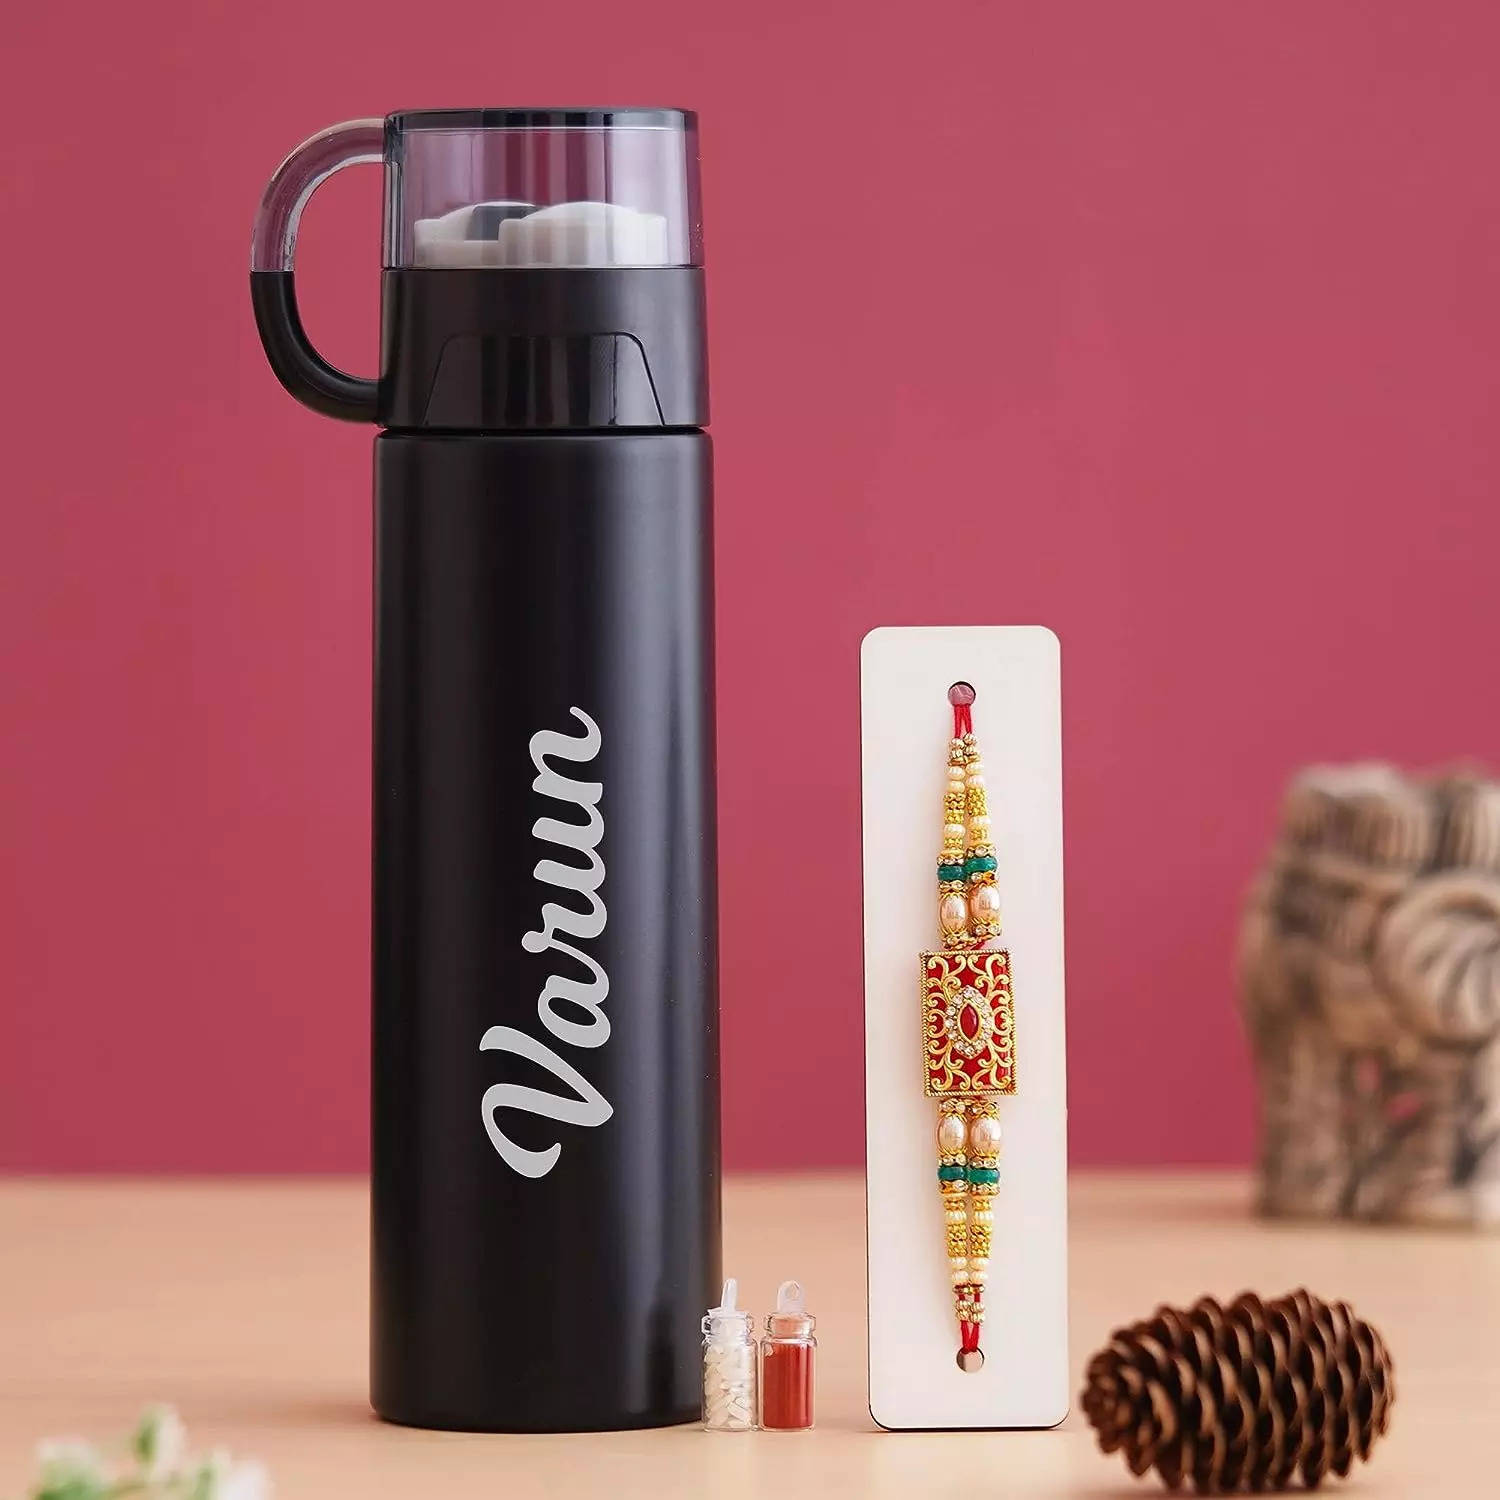 Top 10 Personalized Rakhi Gift Ideas to Make Your Siblings Feel Special |  by GiftCart | Medium